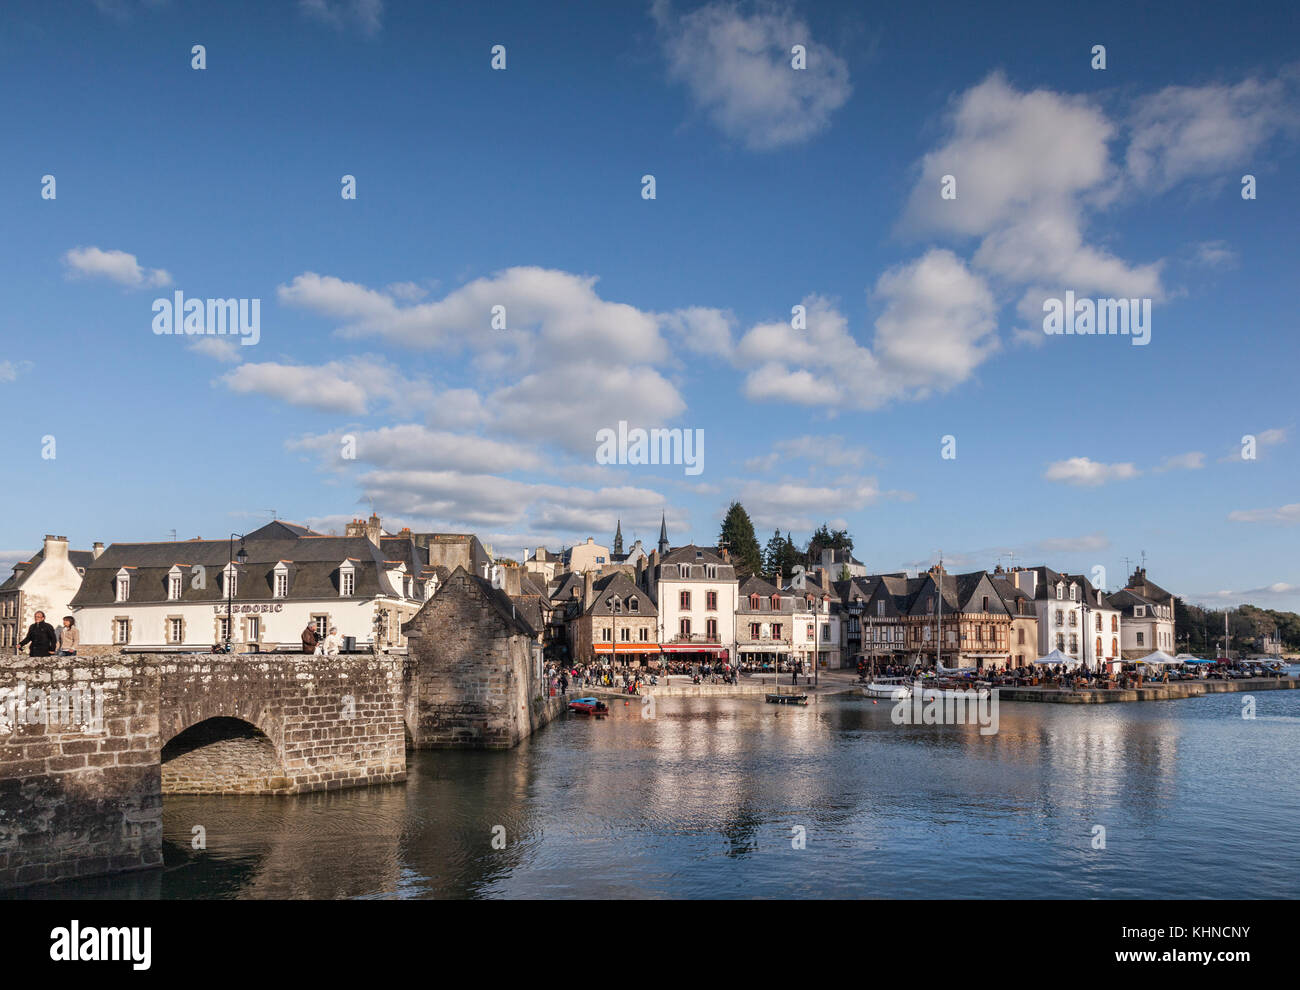 Saint-Goustan, Auray, Morbihan, Brittany, France. Saint-Goustan is the old town, the river is the Loch, the bridge is the Pont Saint-Goustan or Pont-N Stock Photo